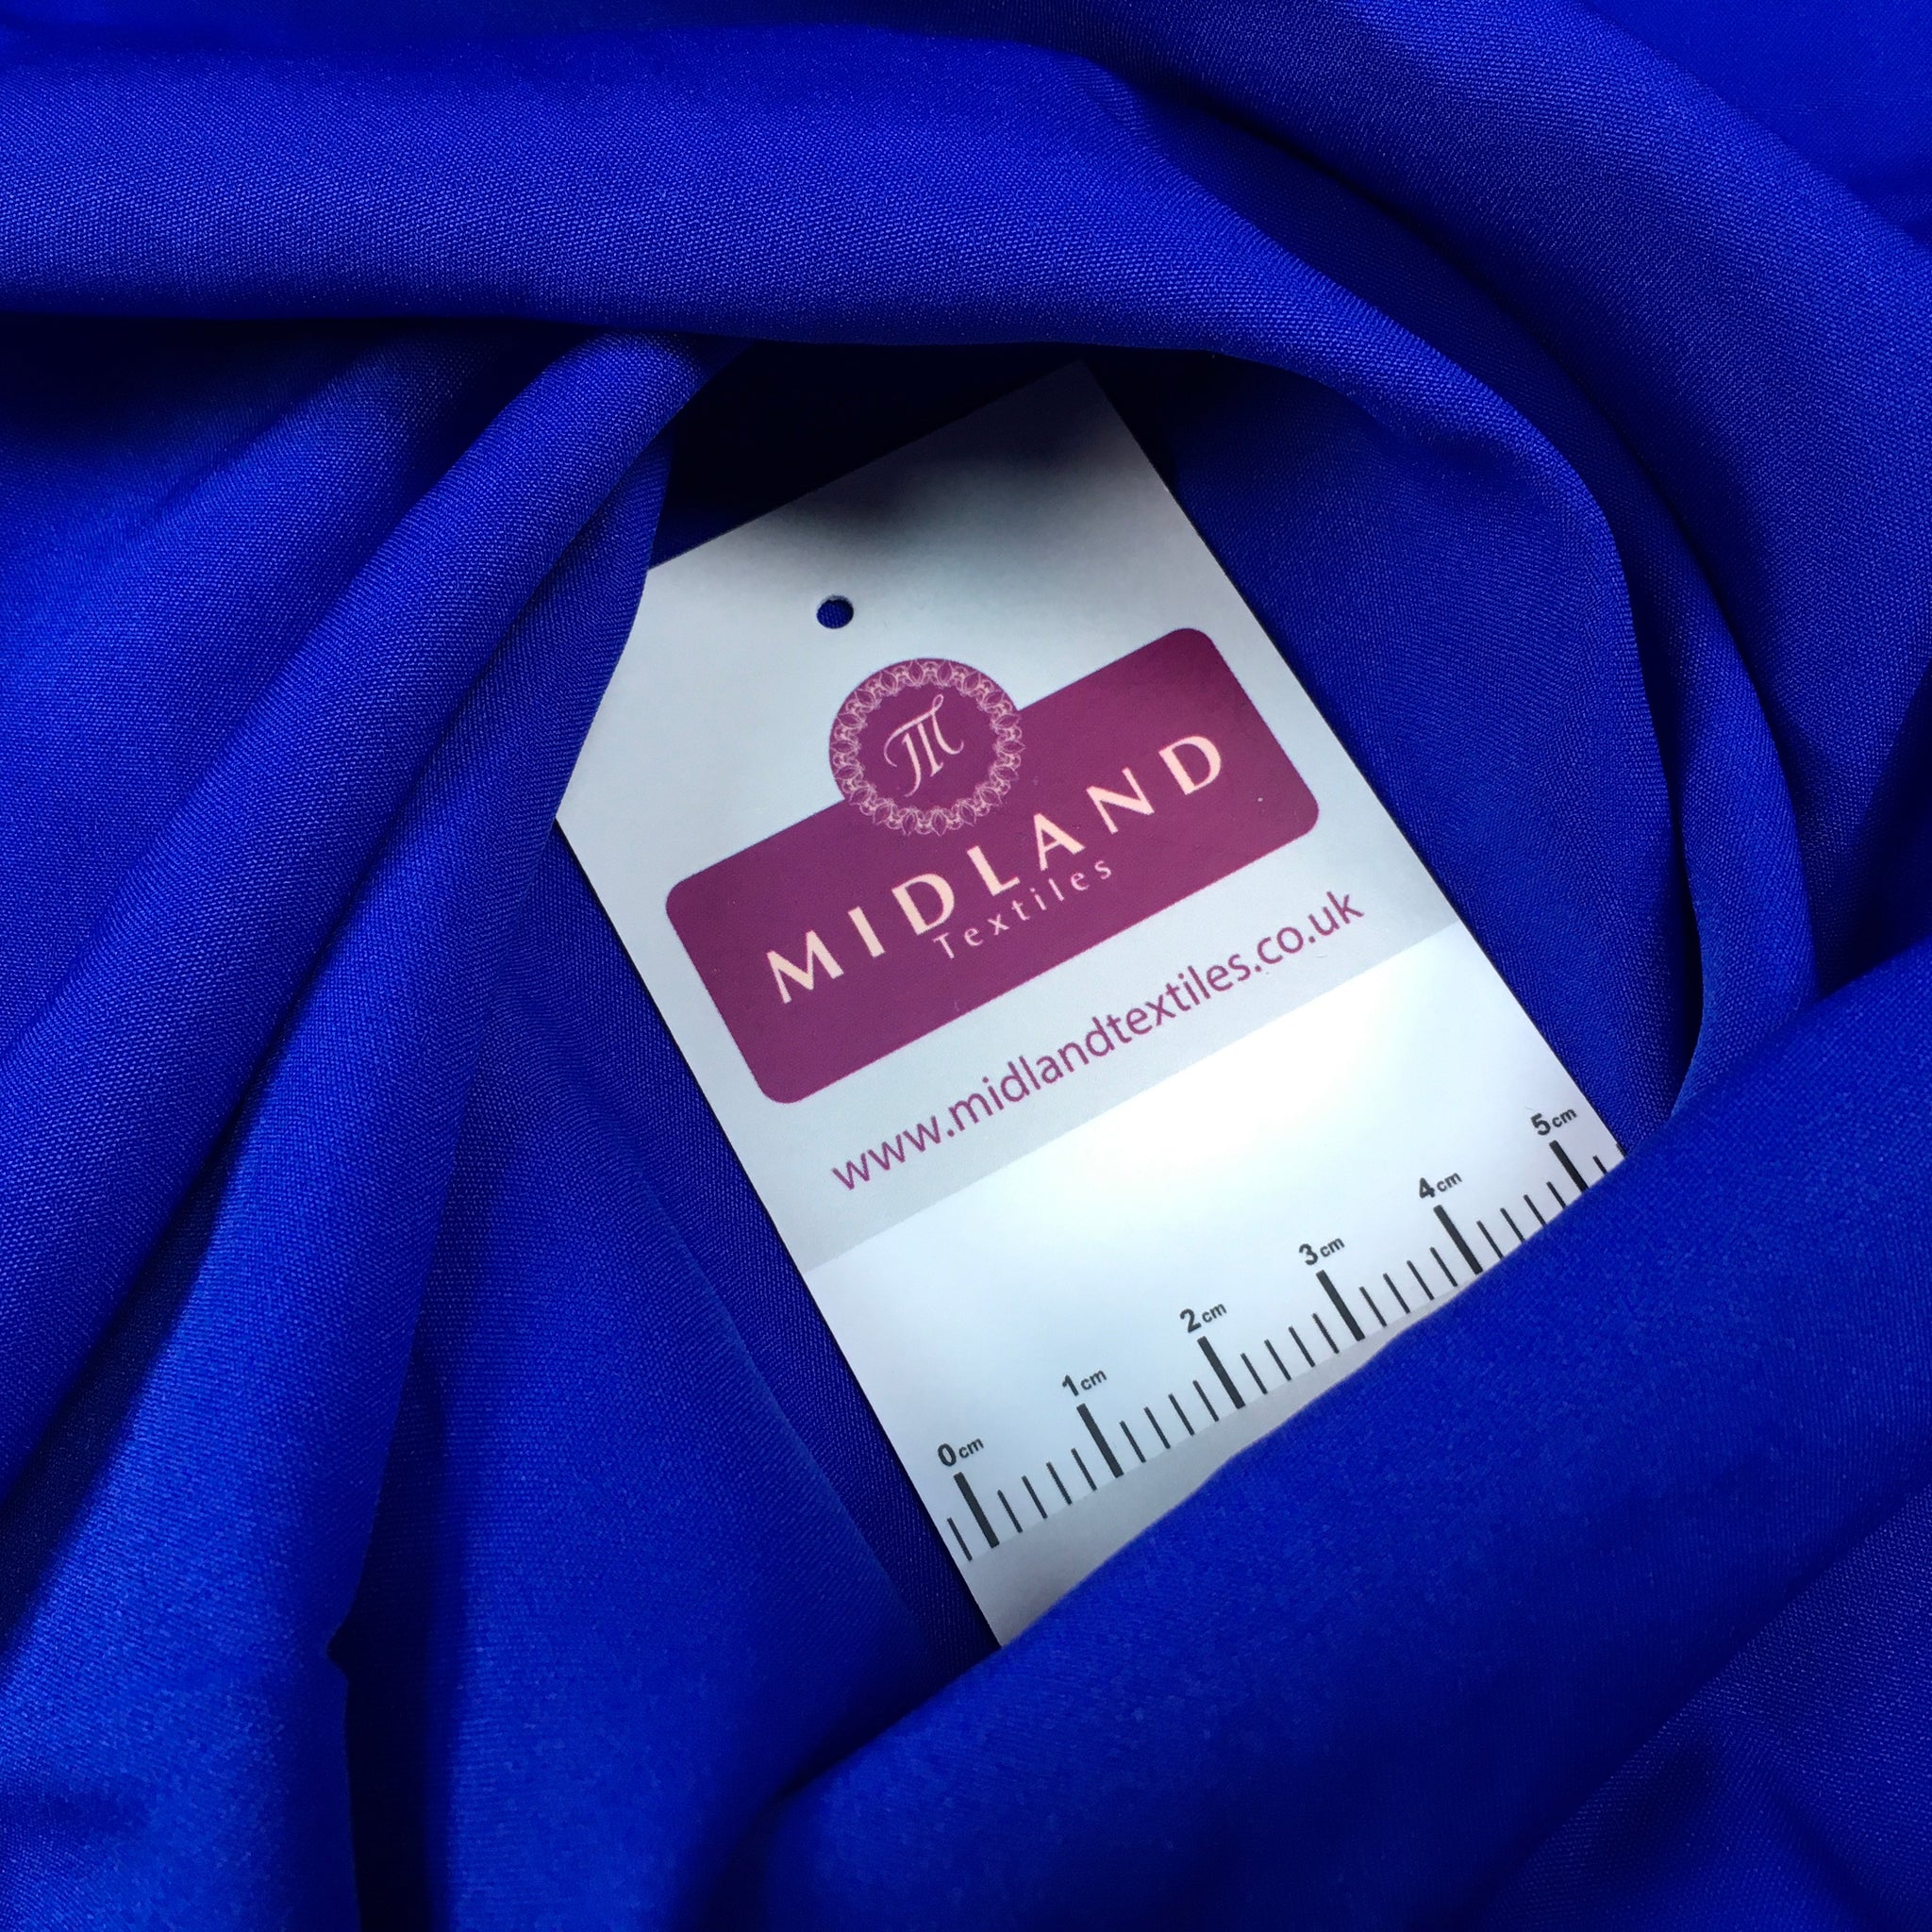 SAMPLES ONLY Plain Soft Lightweight Lining 100% Polyester Fabric 100 cm Wide MR860 Mtex